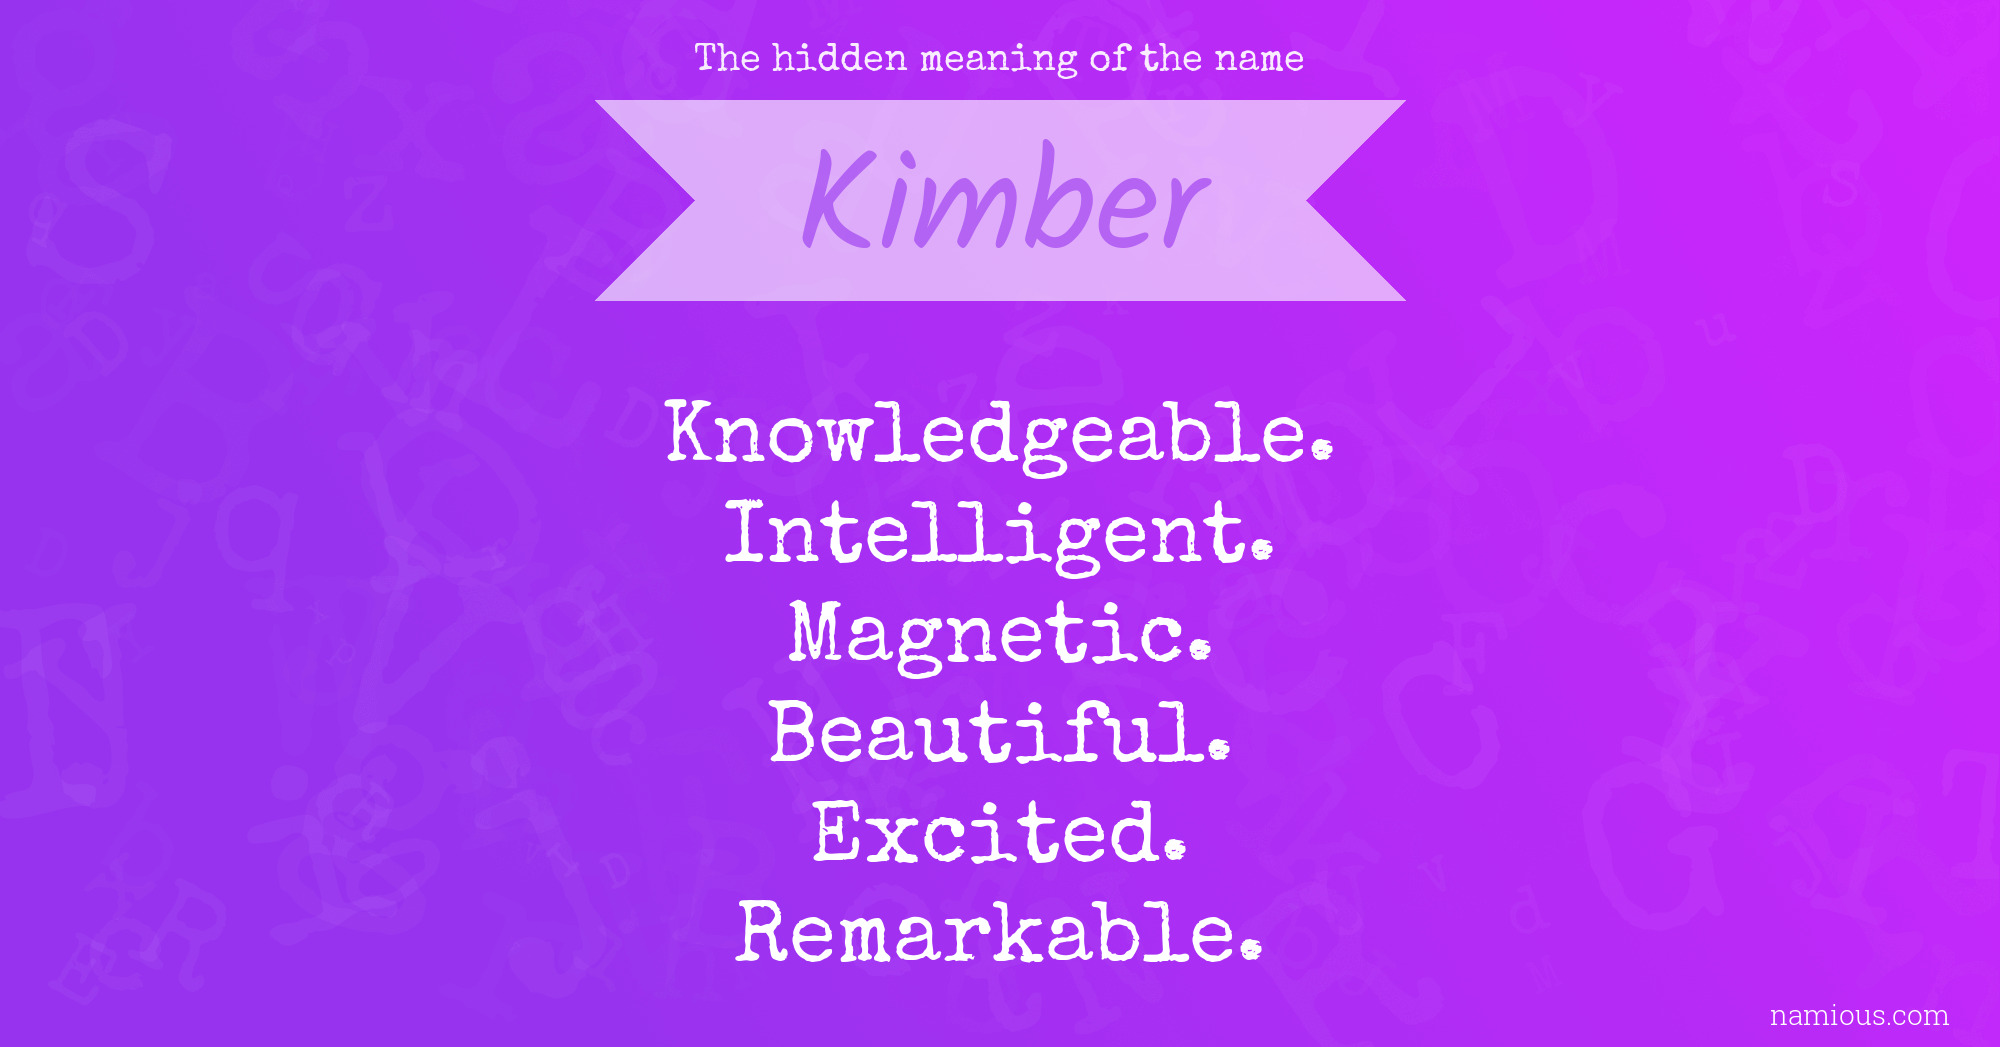 The hidden meaning of the name Kimber